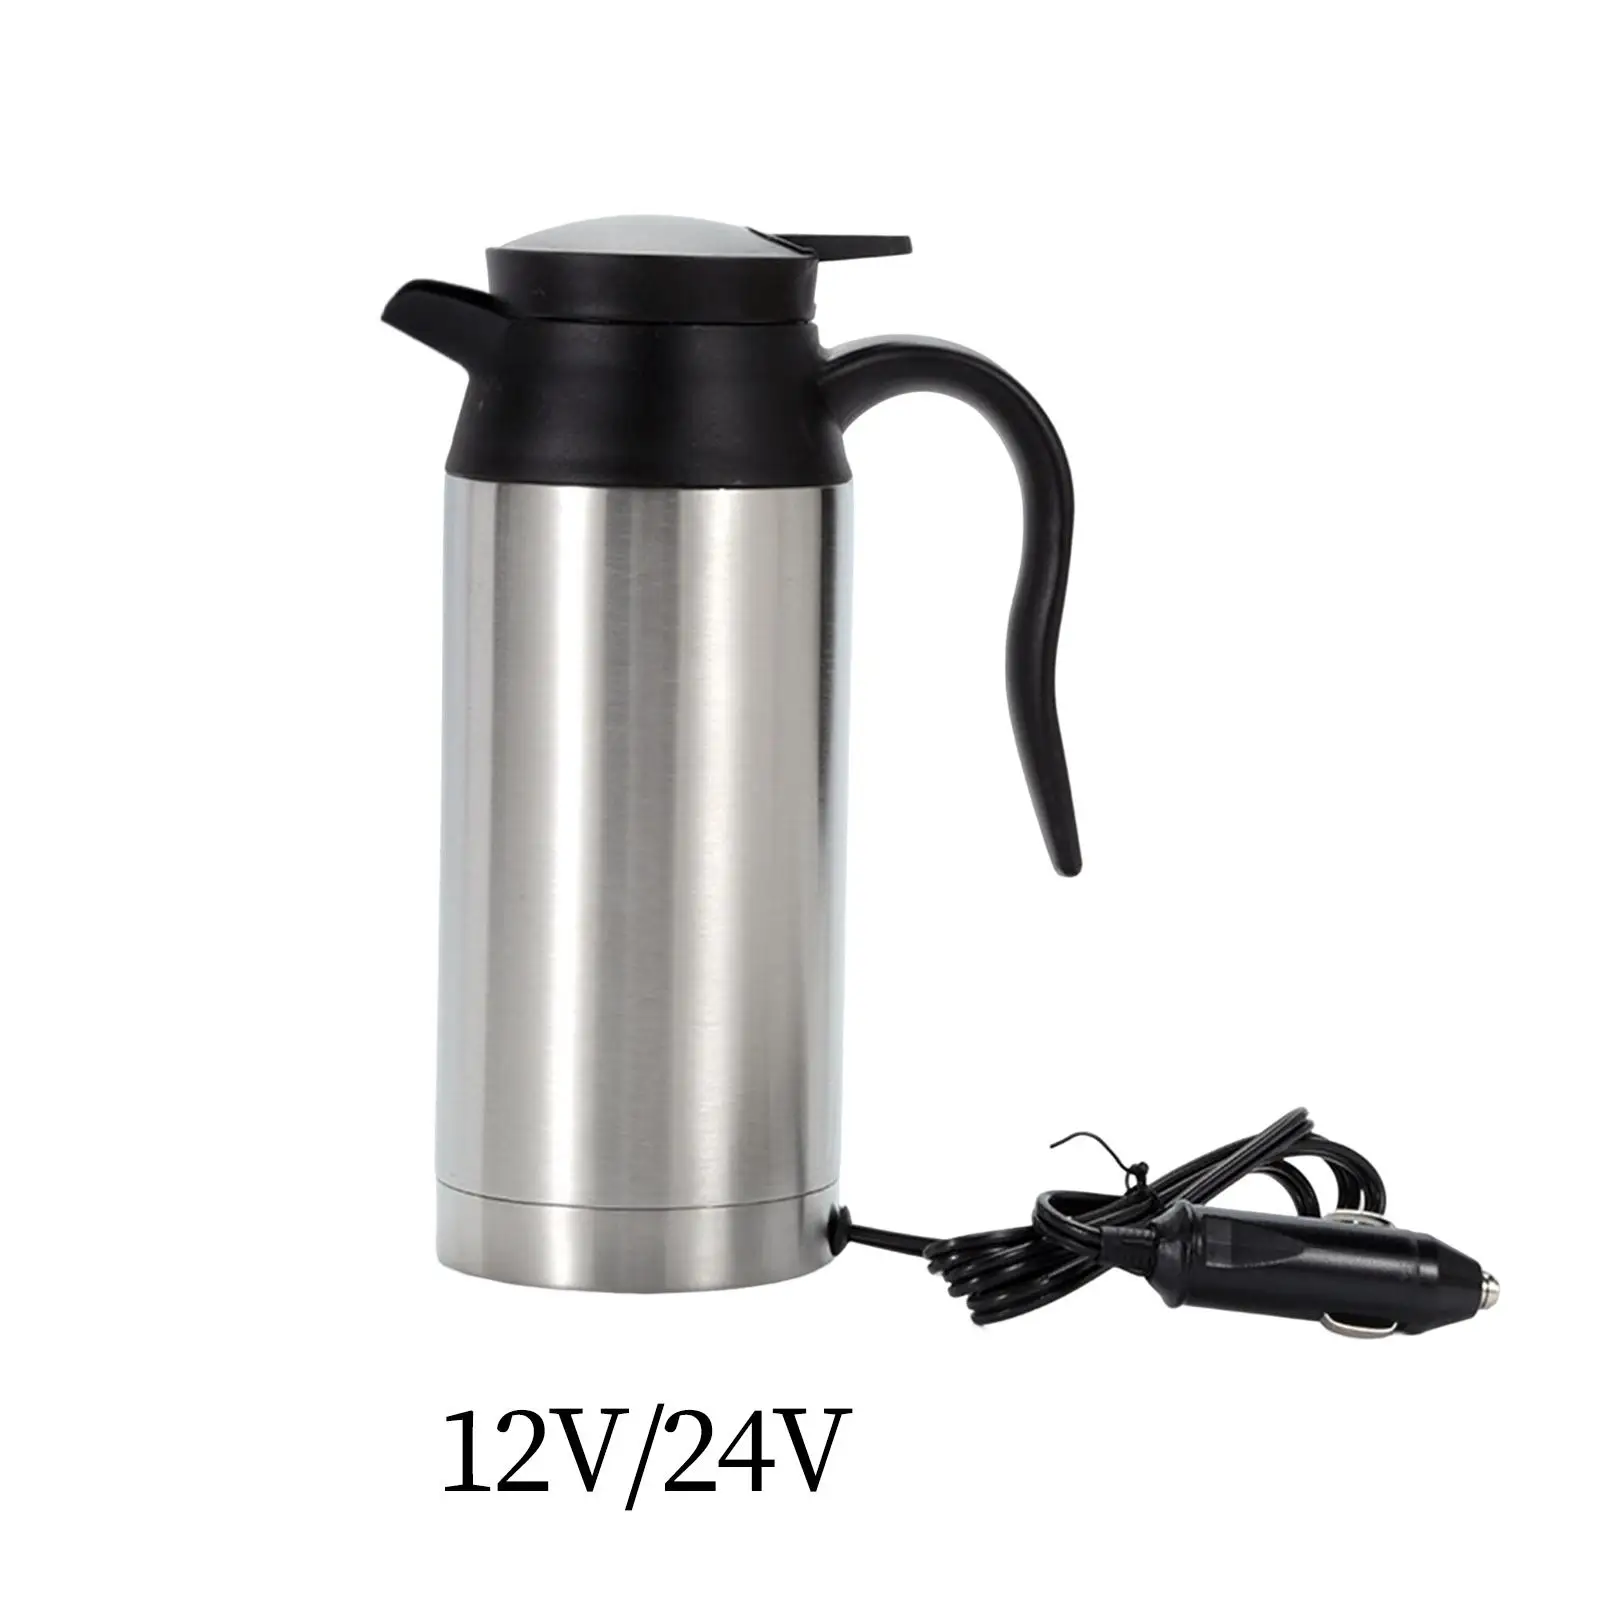 750ml Stainless Steel Automotive Car Heating Kettle Water Bottle Durable for Hot Water, Coffee, Tea, Beverage Coffee Mug Pot